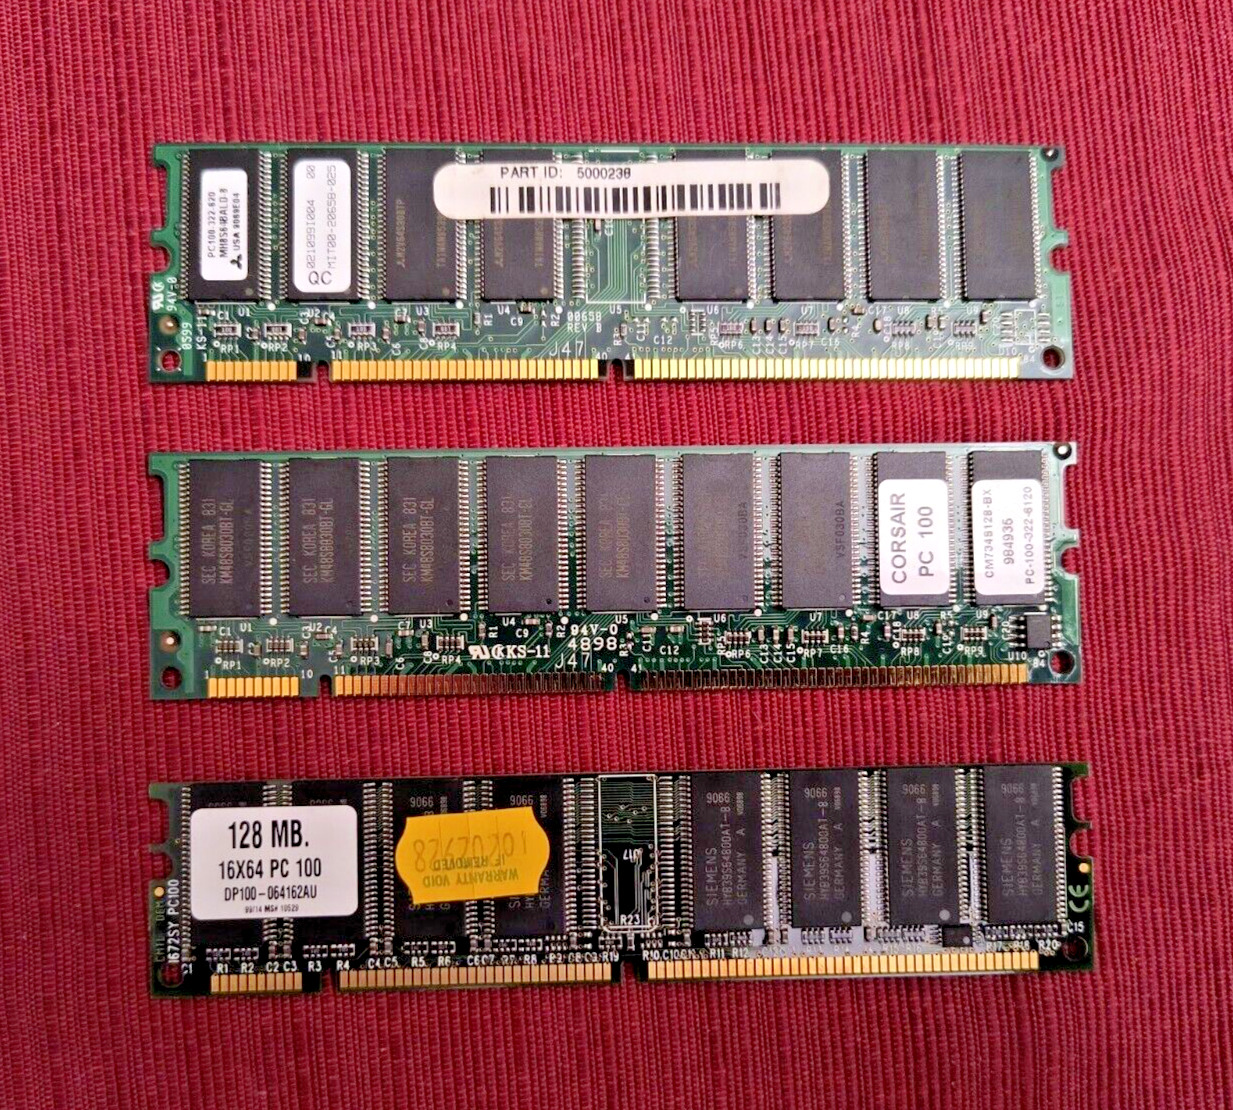 Lot of 3 Sticks of PC 100 128 MB RAM (Assorted Brands)